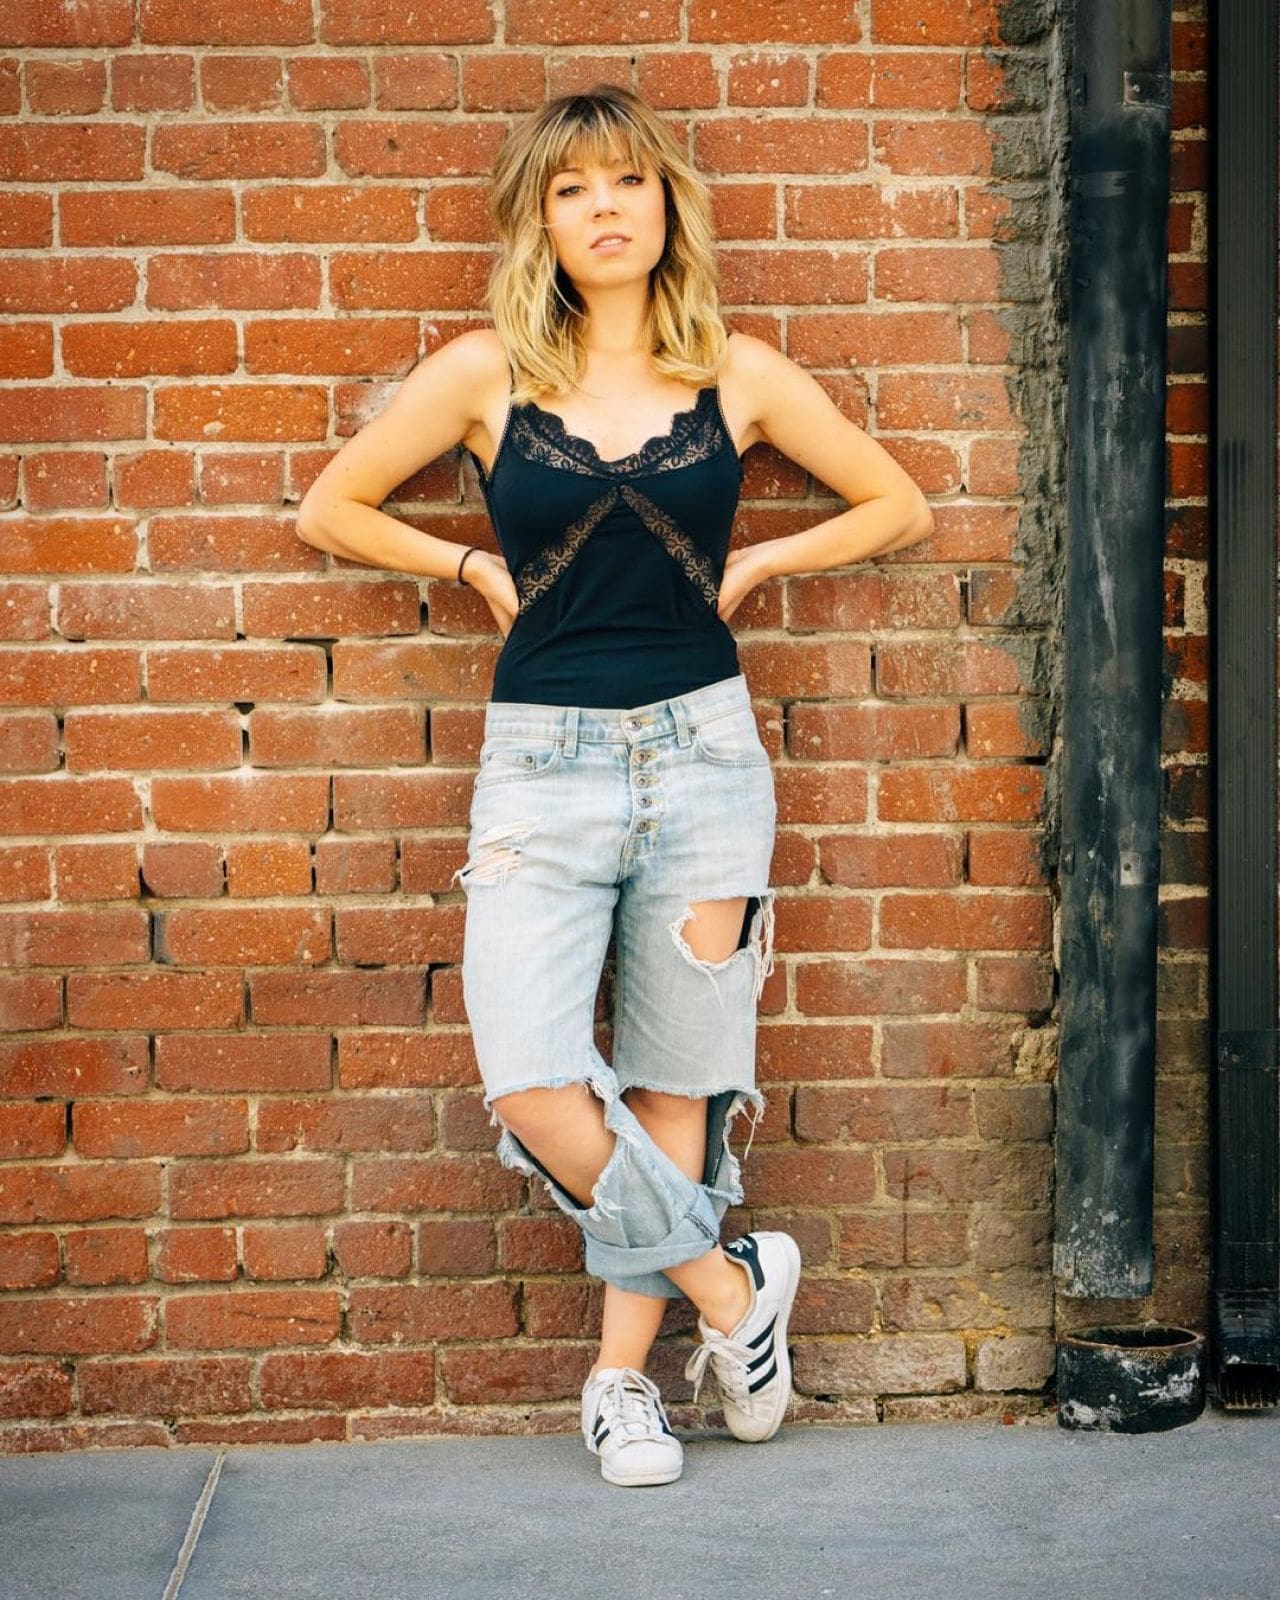 jennette mccurdy sexy photos